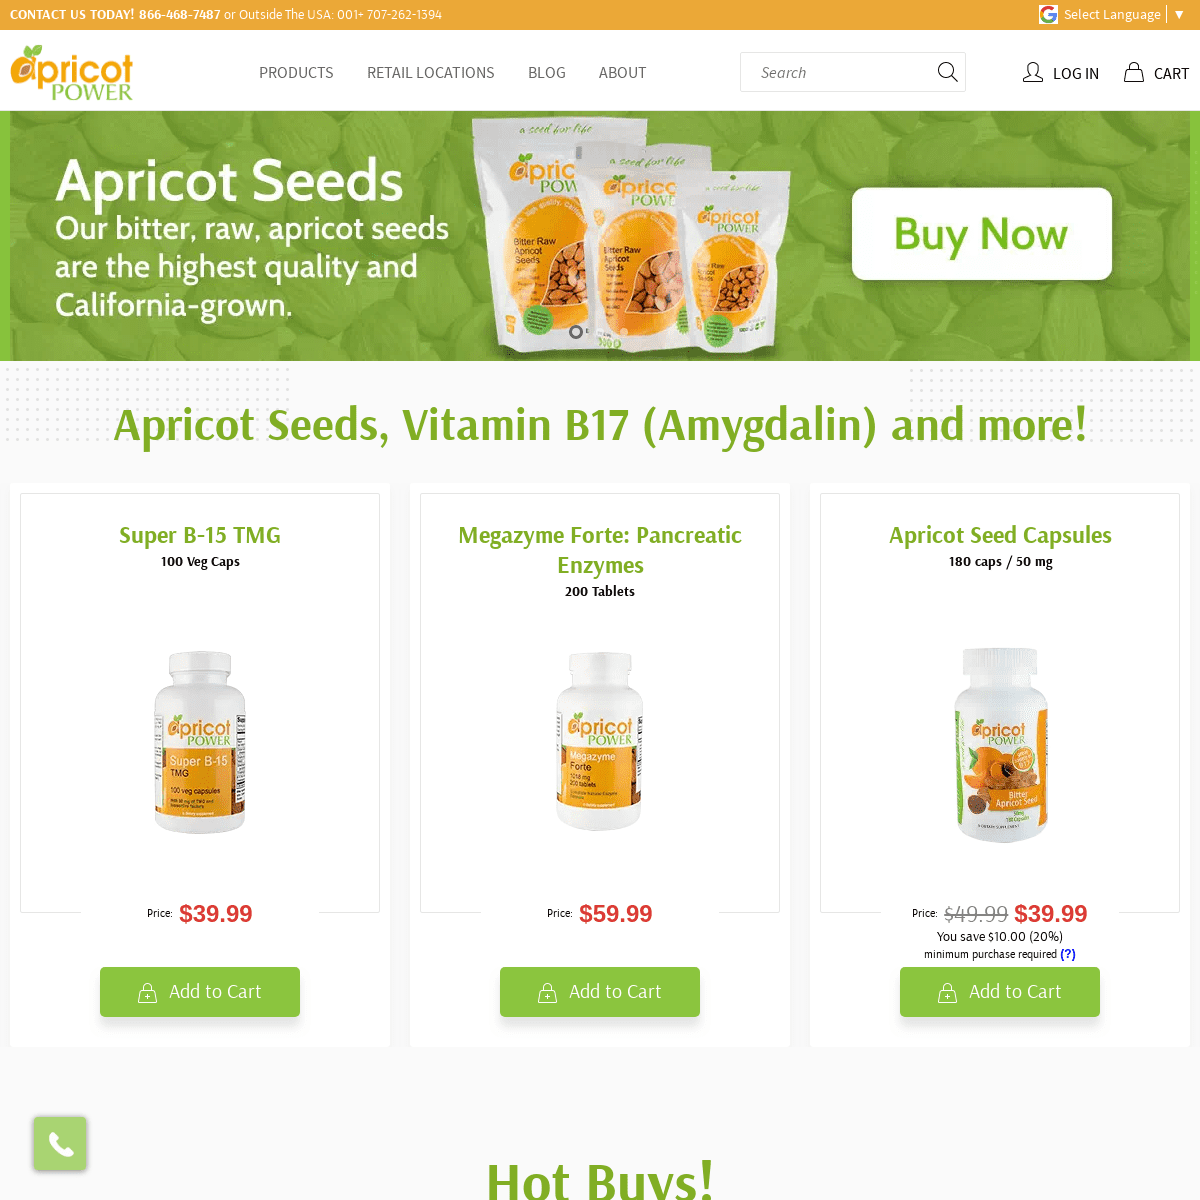 A complete backup of apricotpower.com